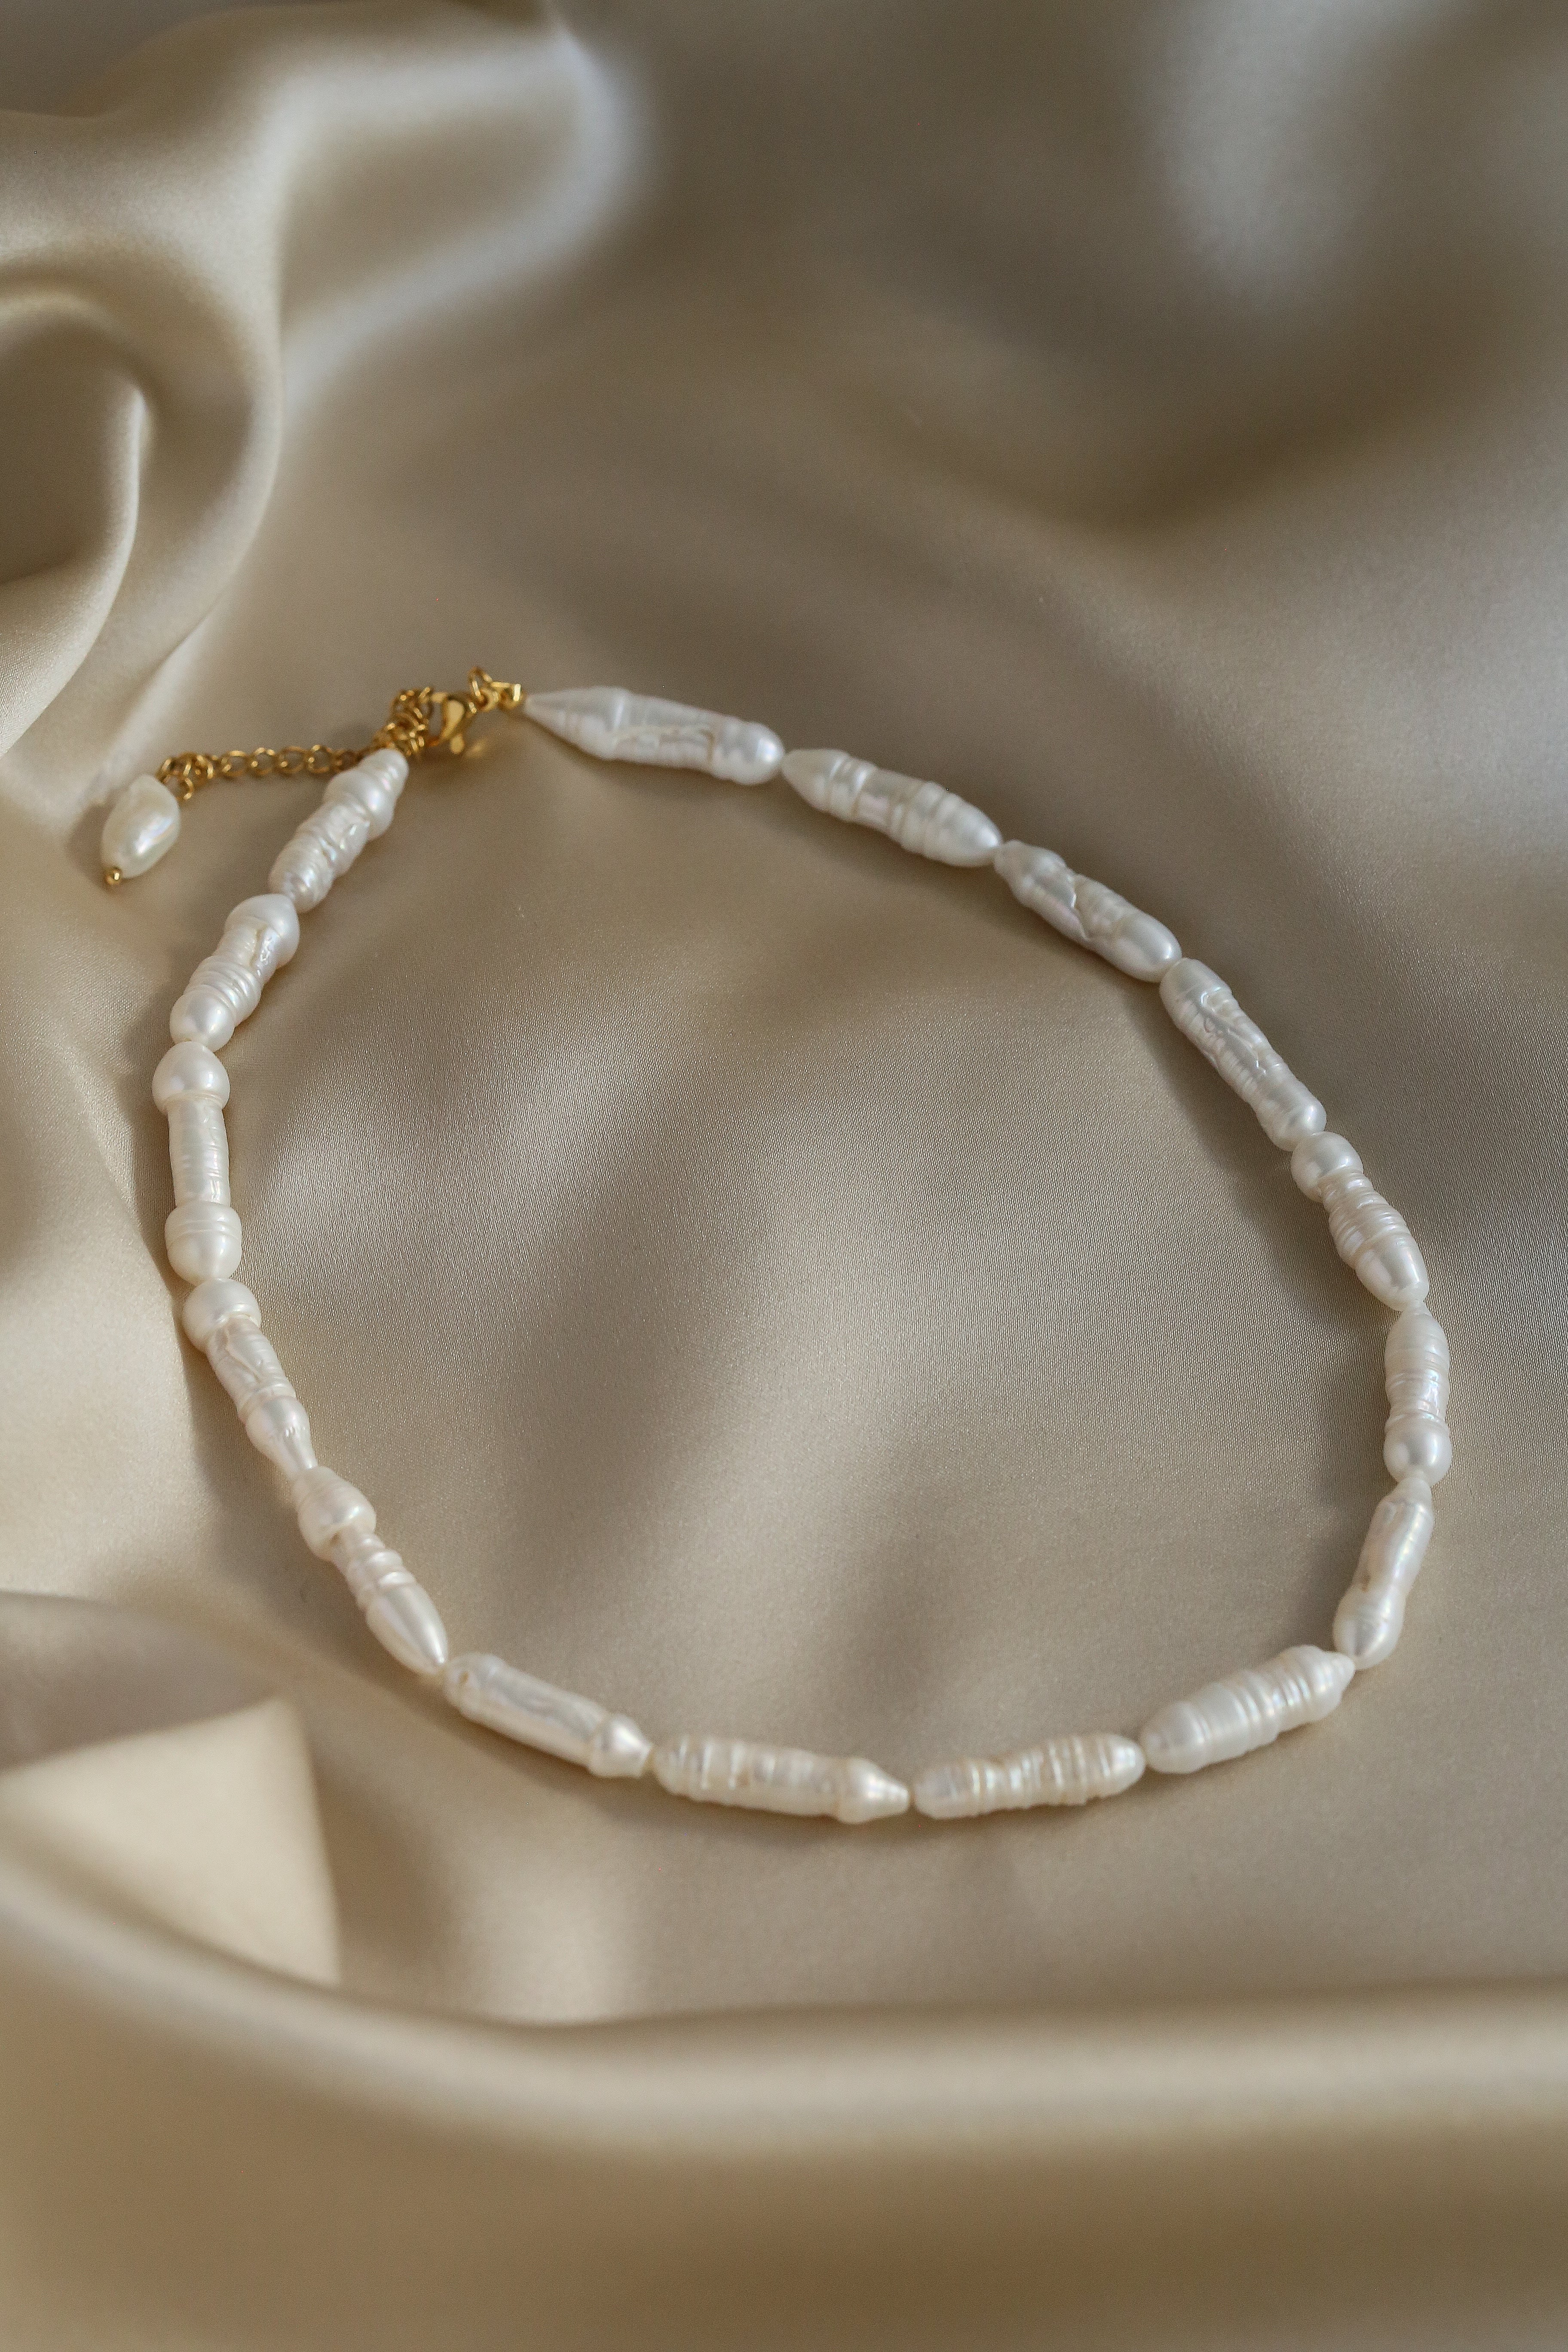 Ivory Choker - Boutique Minimaliste has waterproof, durable, elegant and vintage inspired jewelry